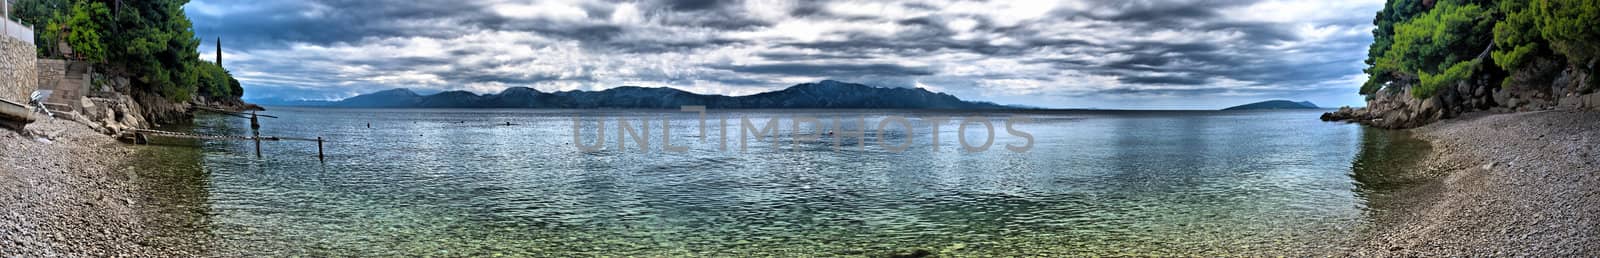  Scenic panorama view of the mountains, clouds and sea in Croati by mozzyb